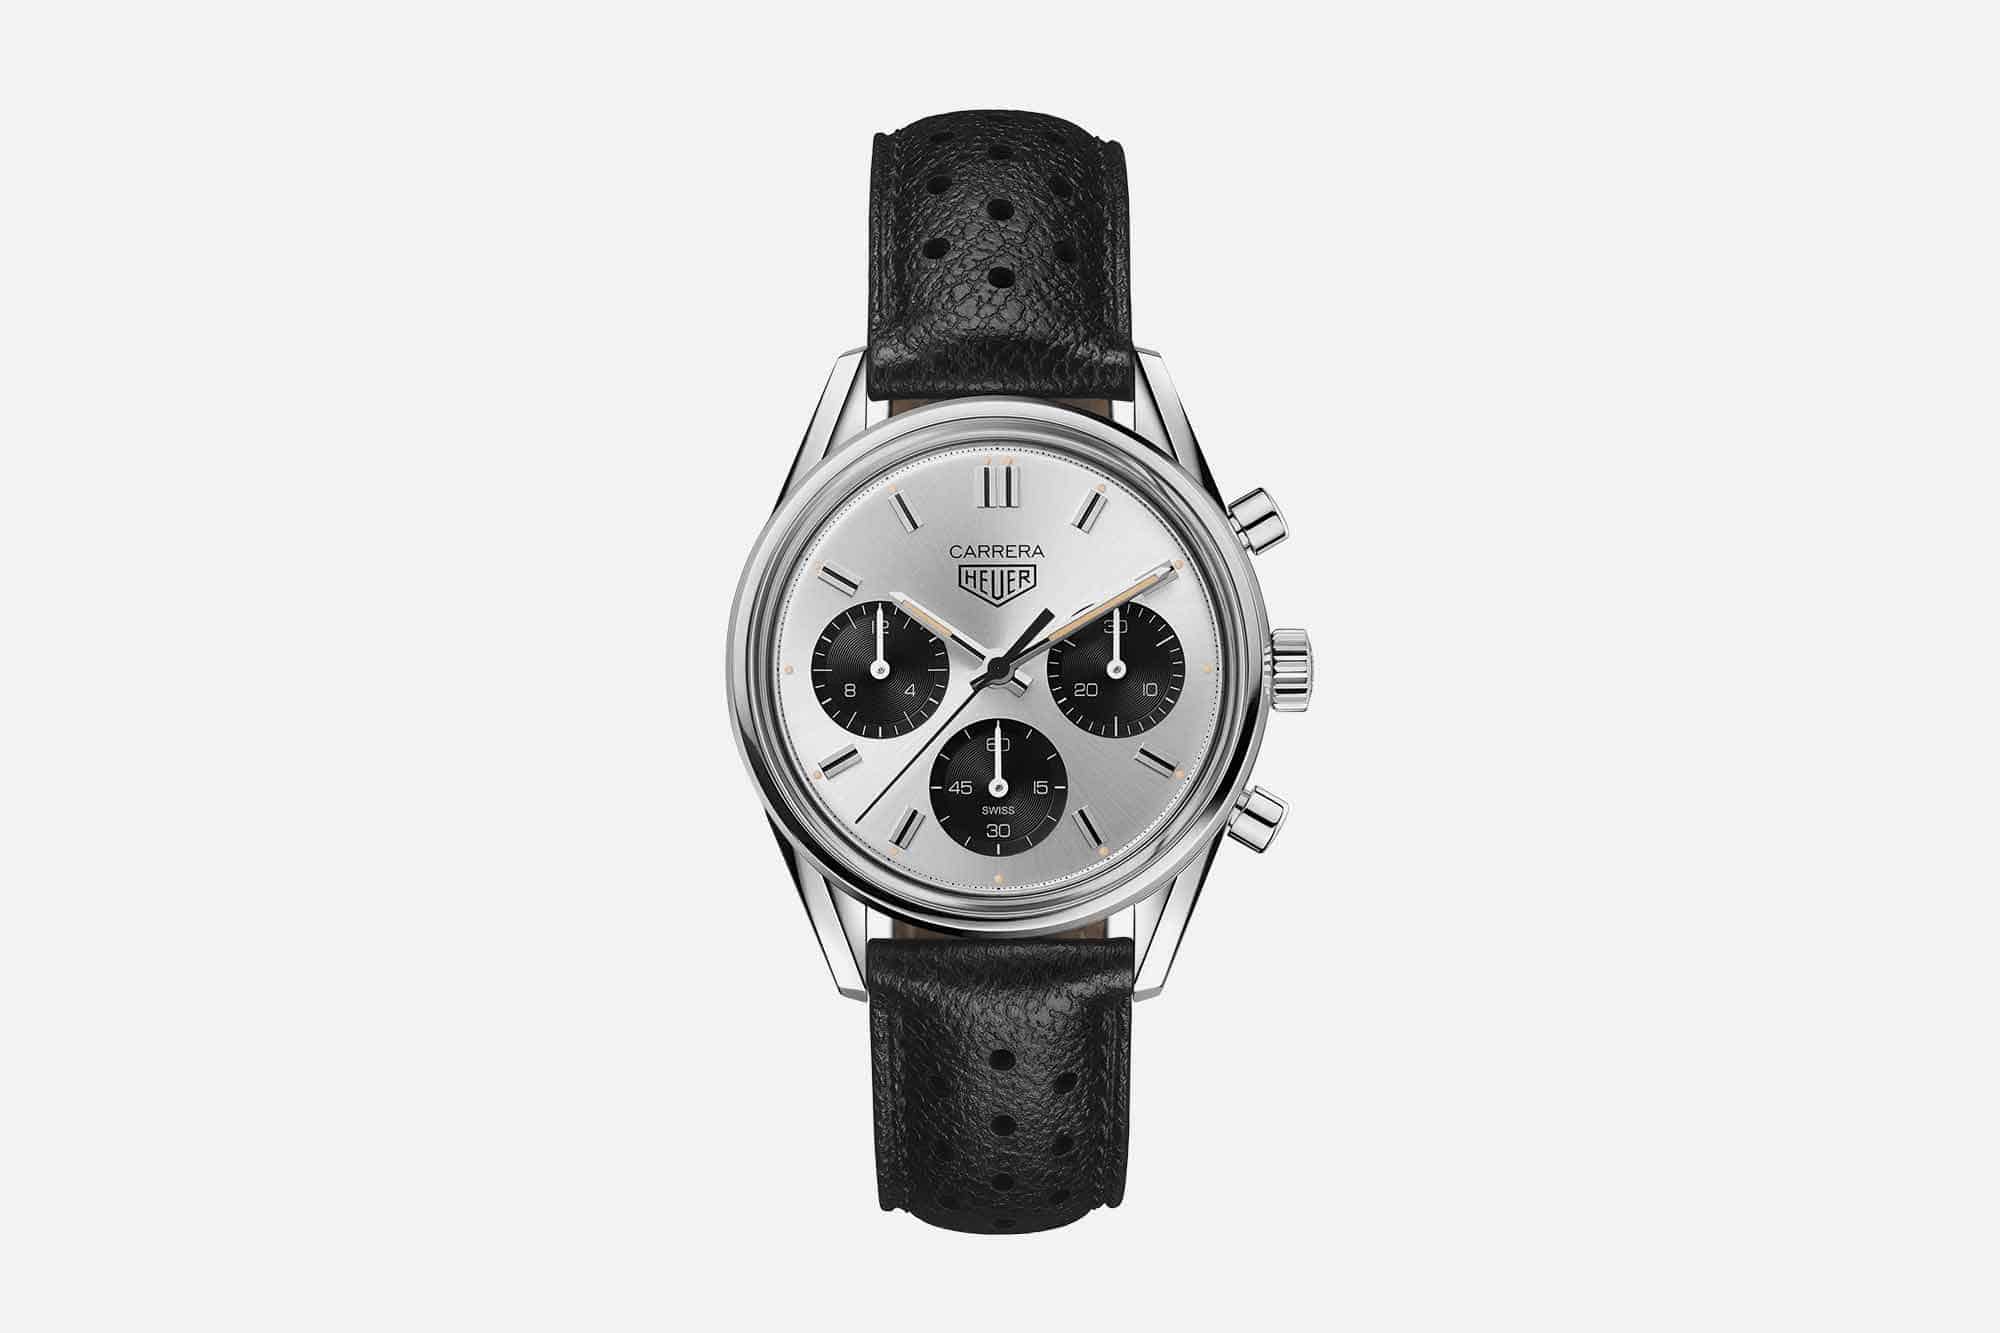 TAG Heuer's new Carrera Chronograph will be seriously rare